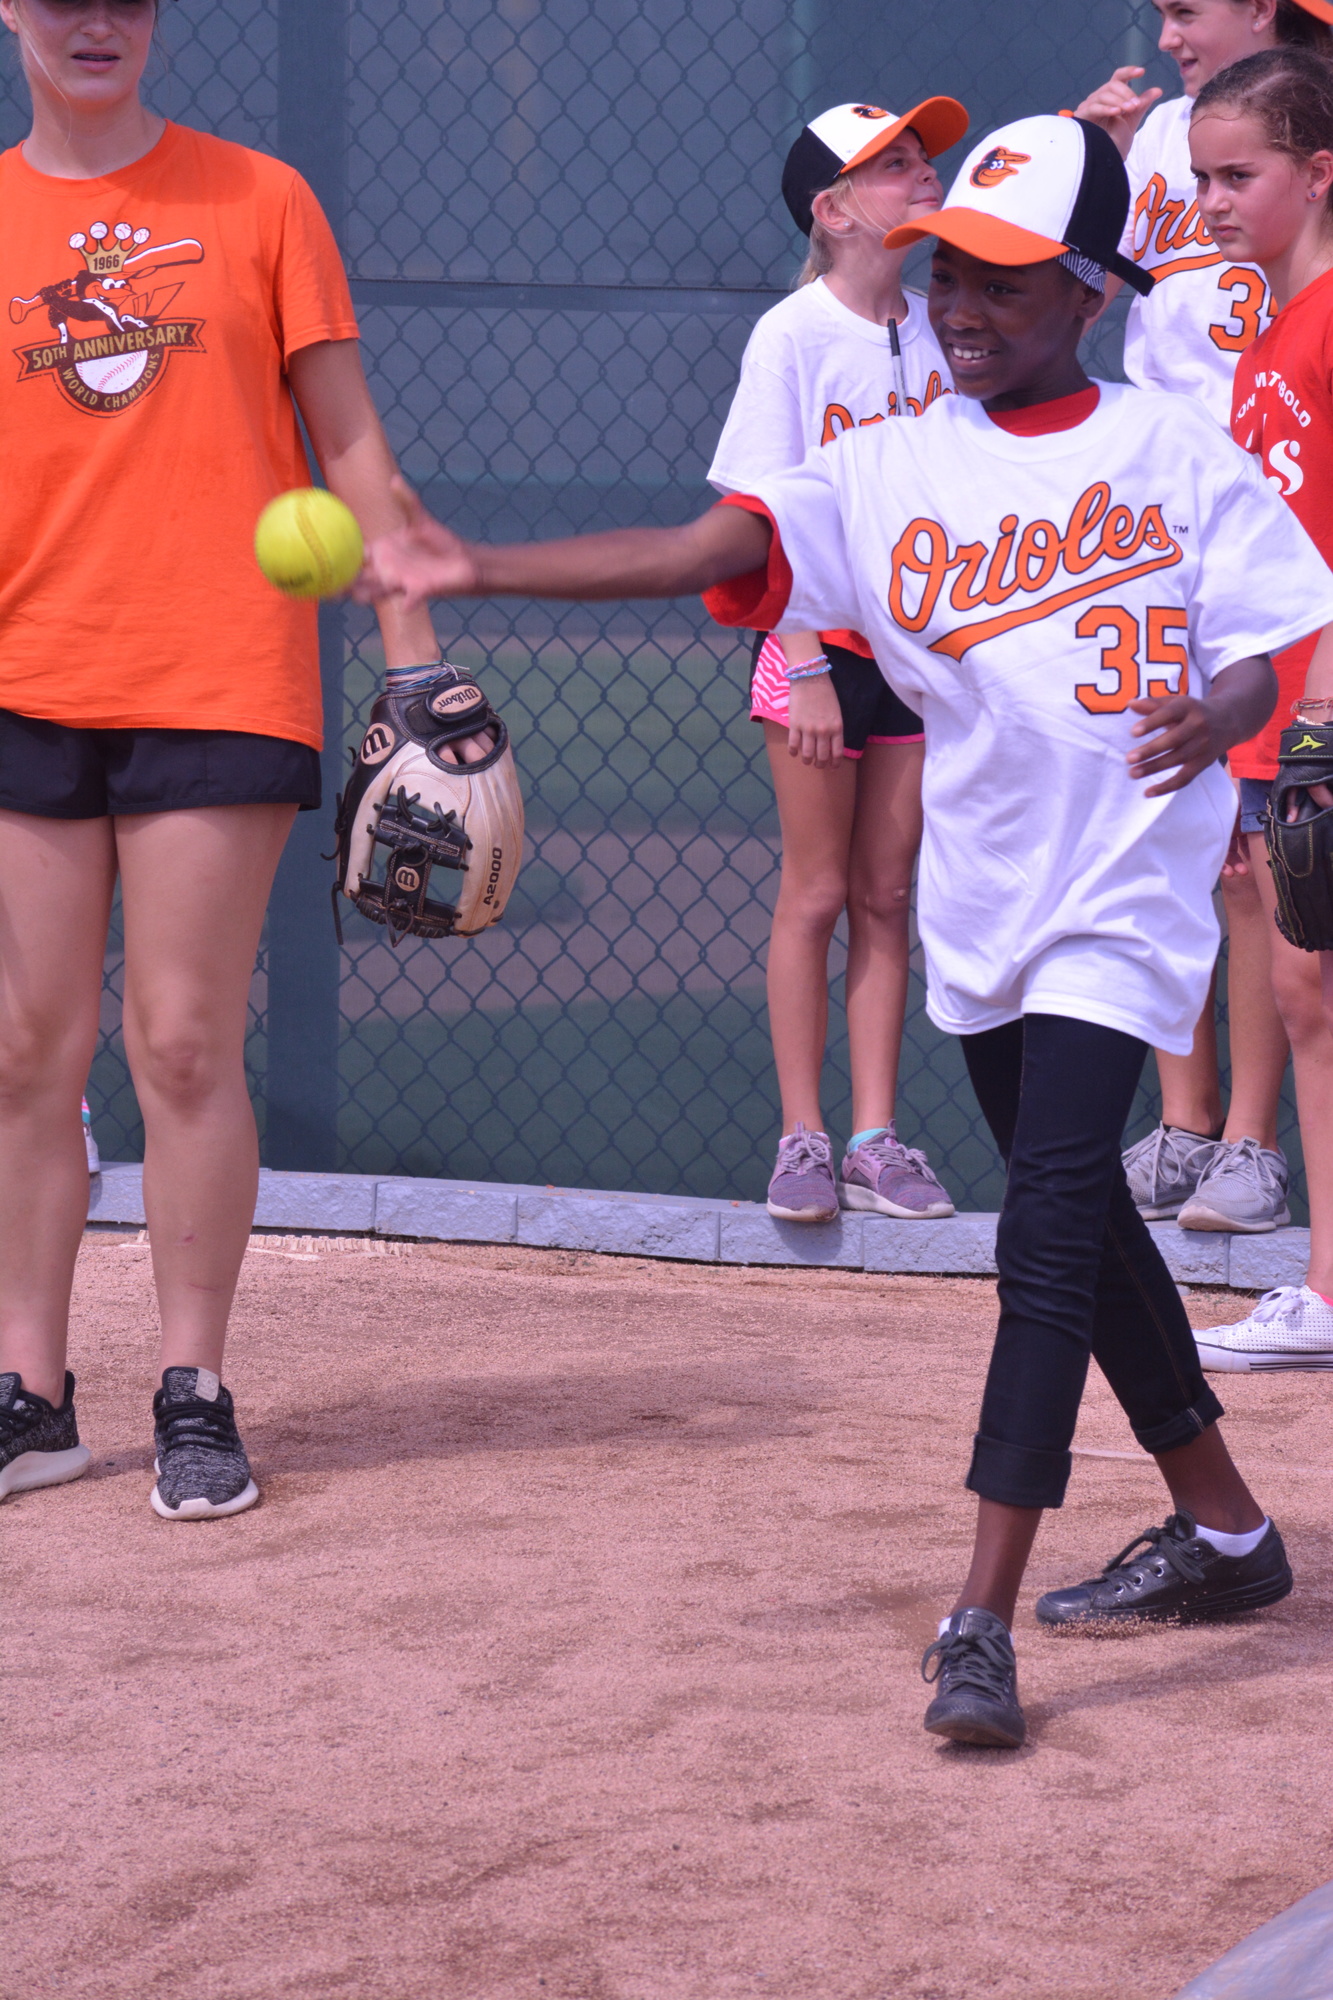 Zhenasia learns to pitch at the Orioles Girls Inc. clinic on July 27.